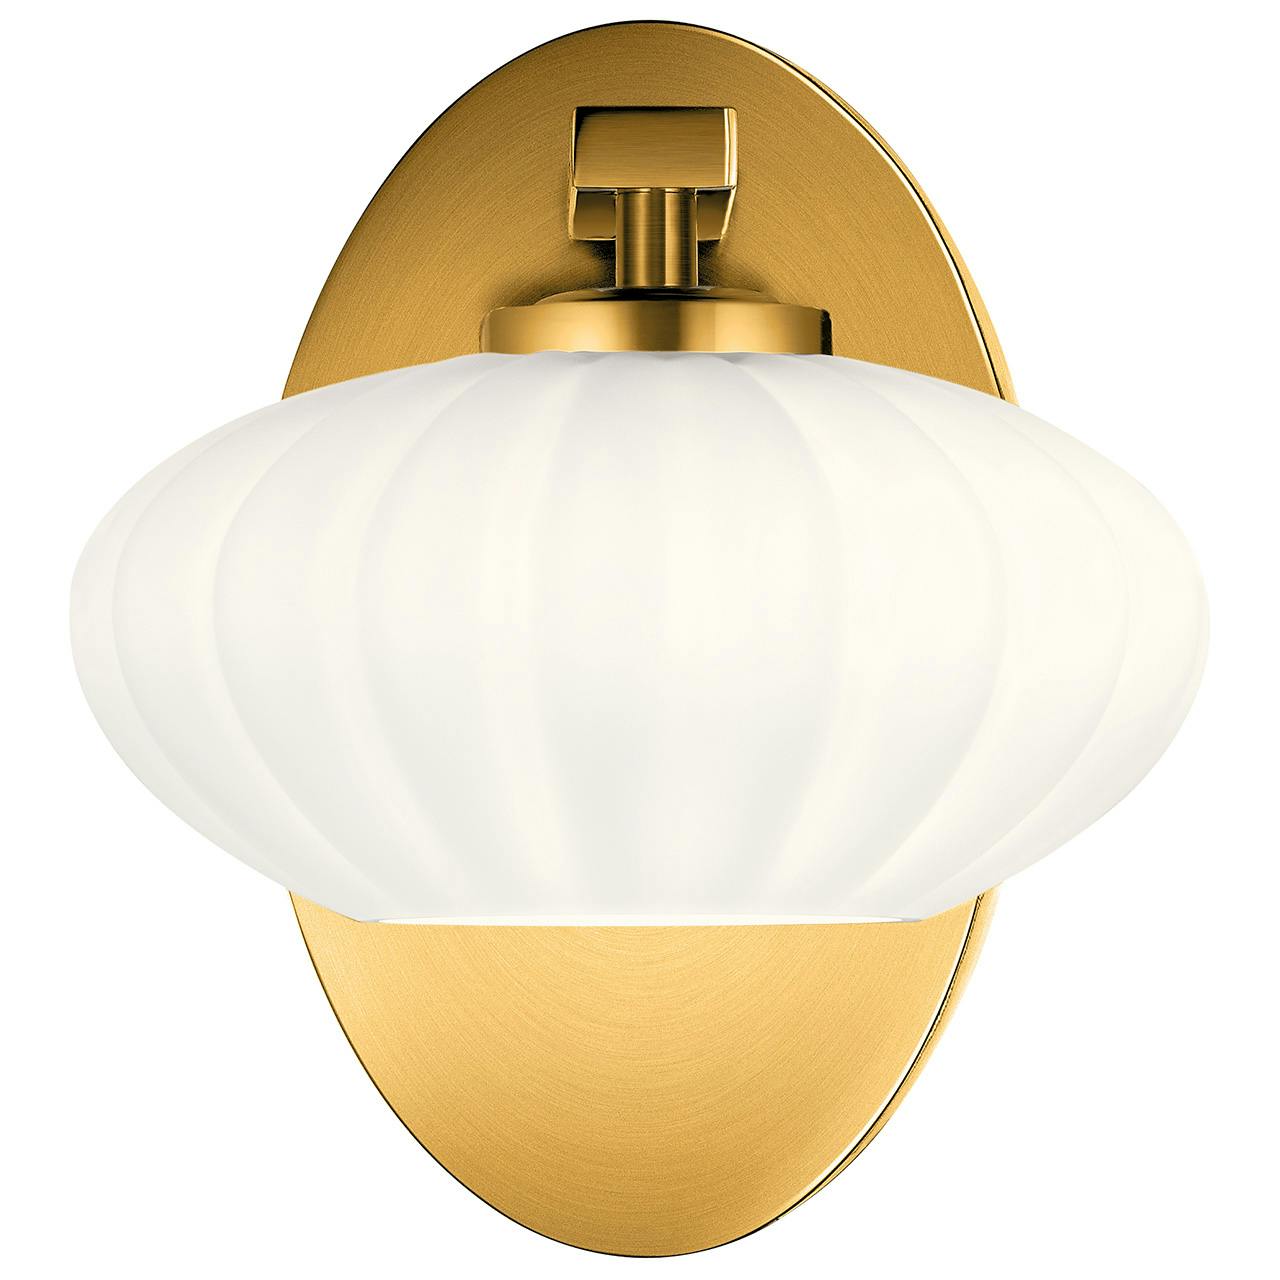 The Pim 8" 1 Light Wall Sconce in Fox Gold facing down on a white background